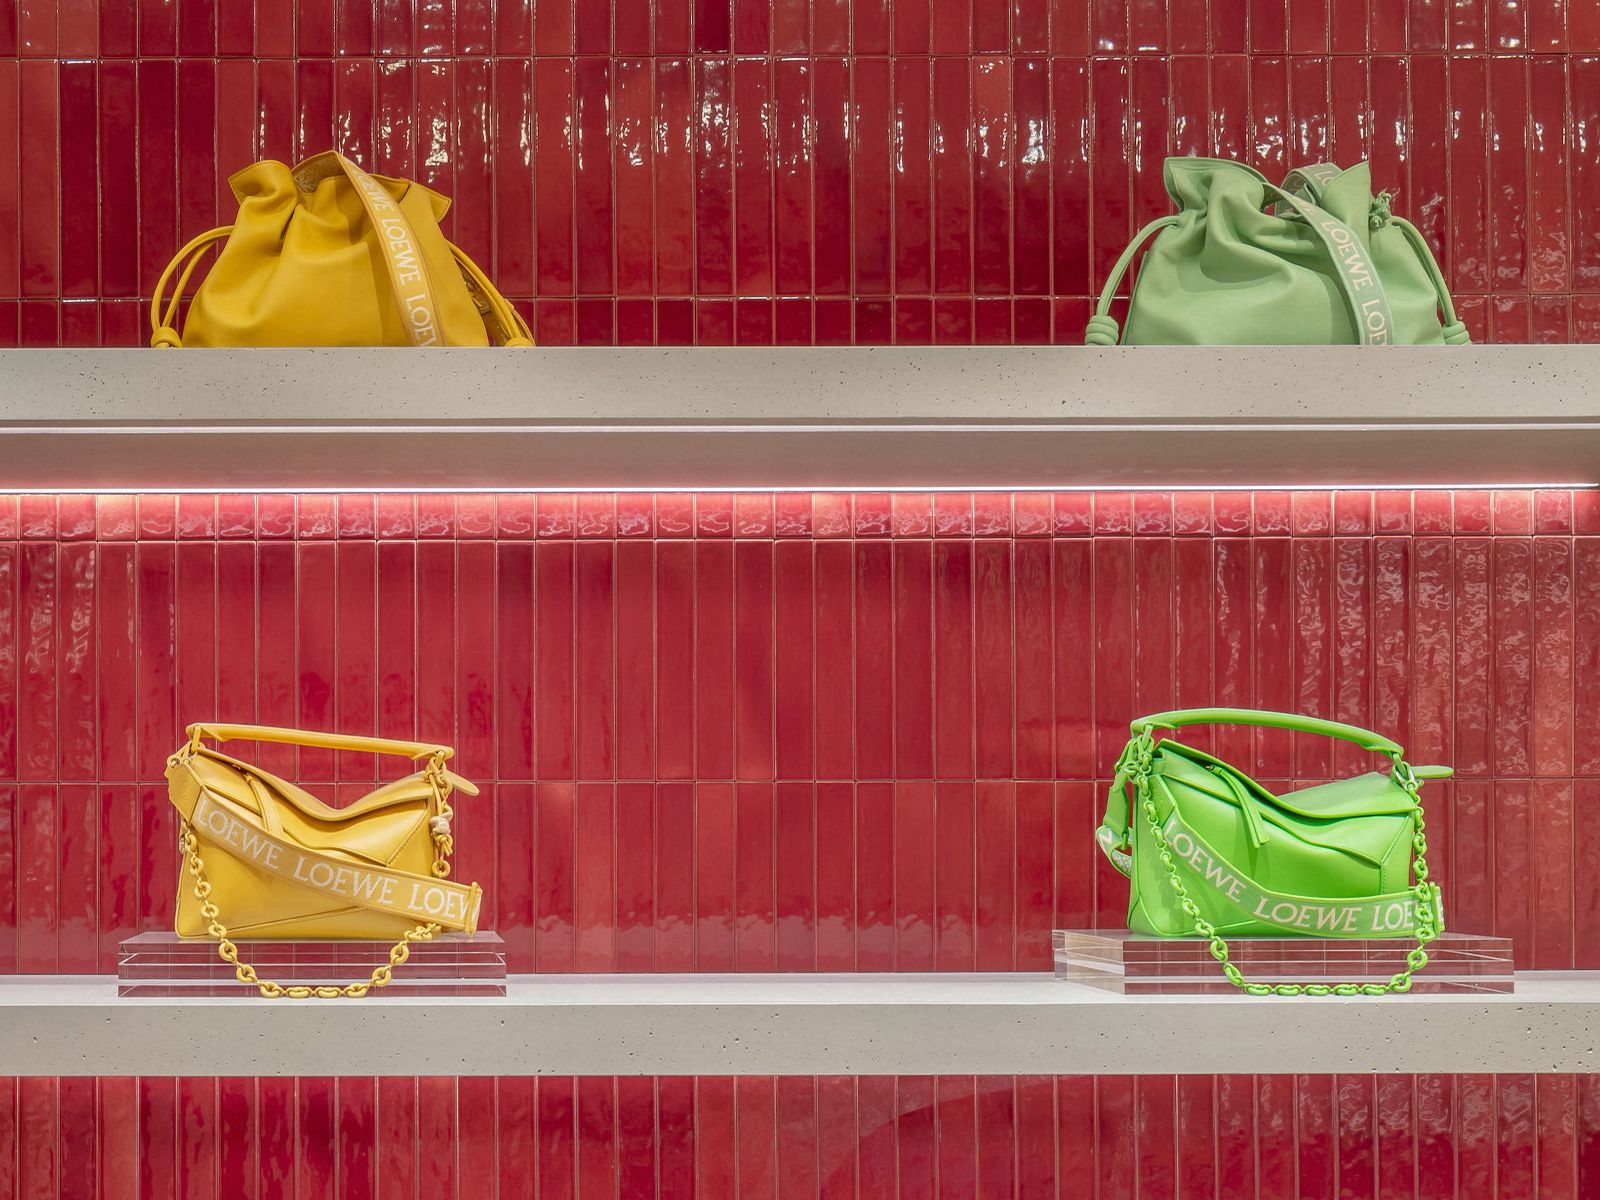 All the details on LOEWE’s first store in the Netherlands